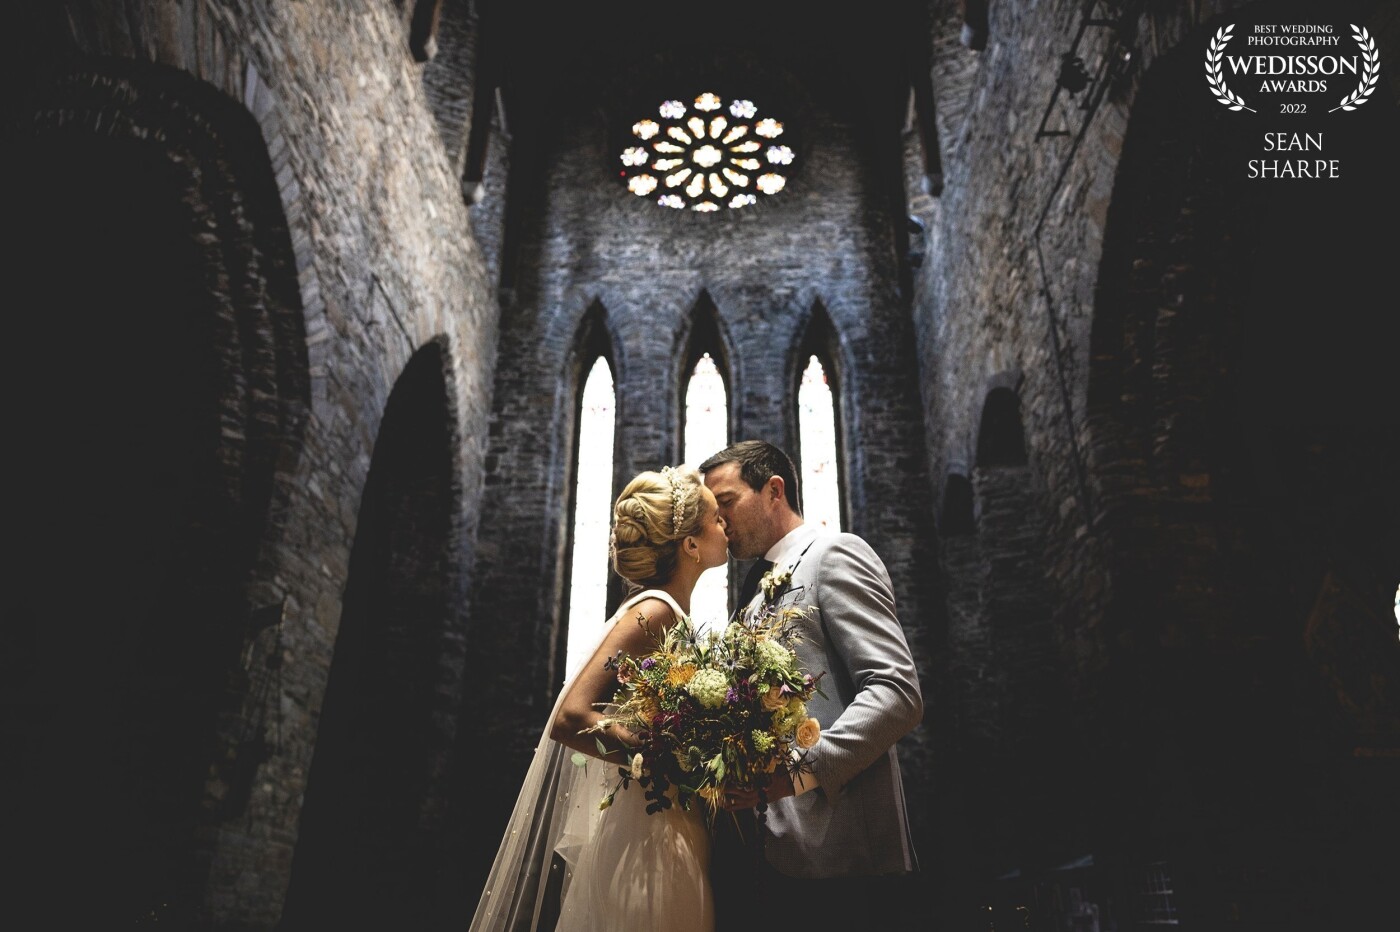 Lisa and Donal! What a day with these two in the beautiful Killarney, Co. Kerry. This shot was taken in the magnificent St. Mary's Cathedral in Killarney. The architecture is just amazing and gives such a cool back drop!